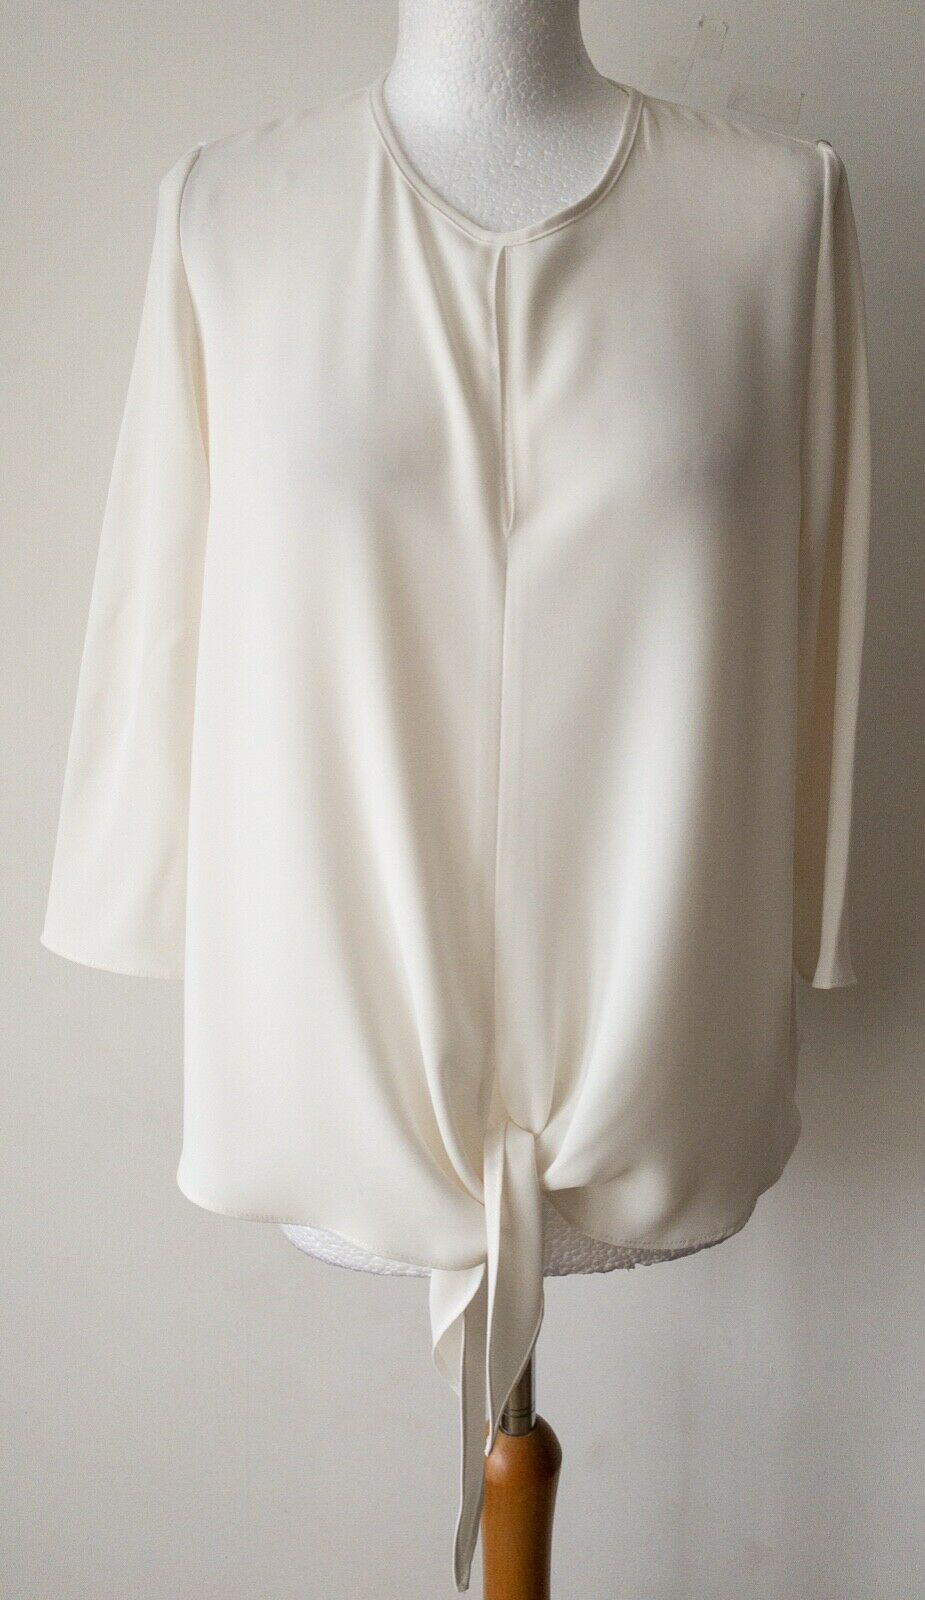 River Island Key Hole Tie Front Blouse Size 6 would fit 8 10 Oversized